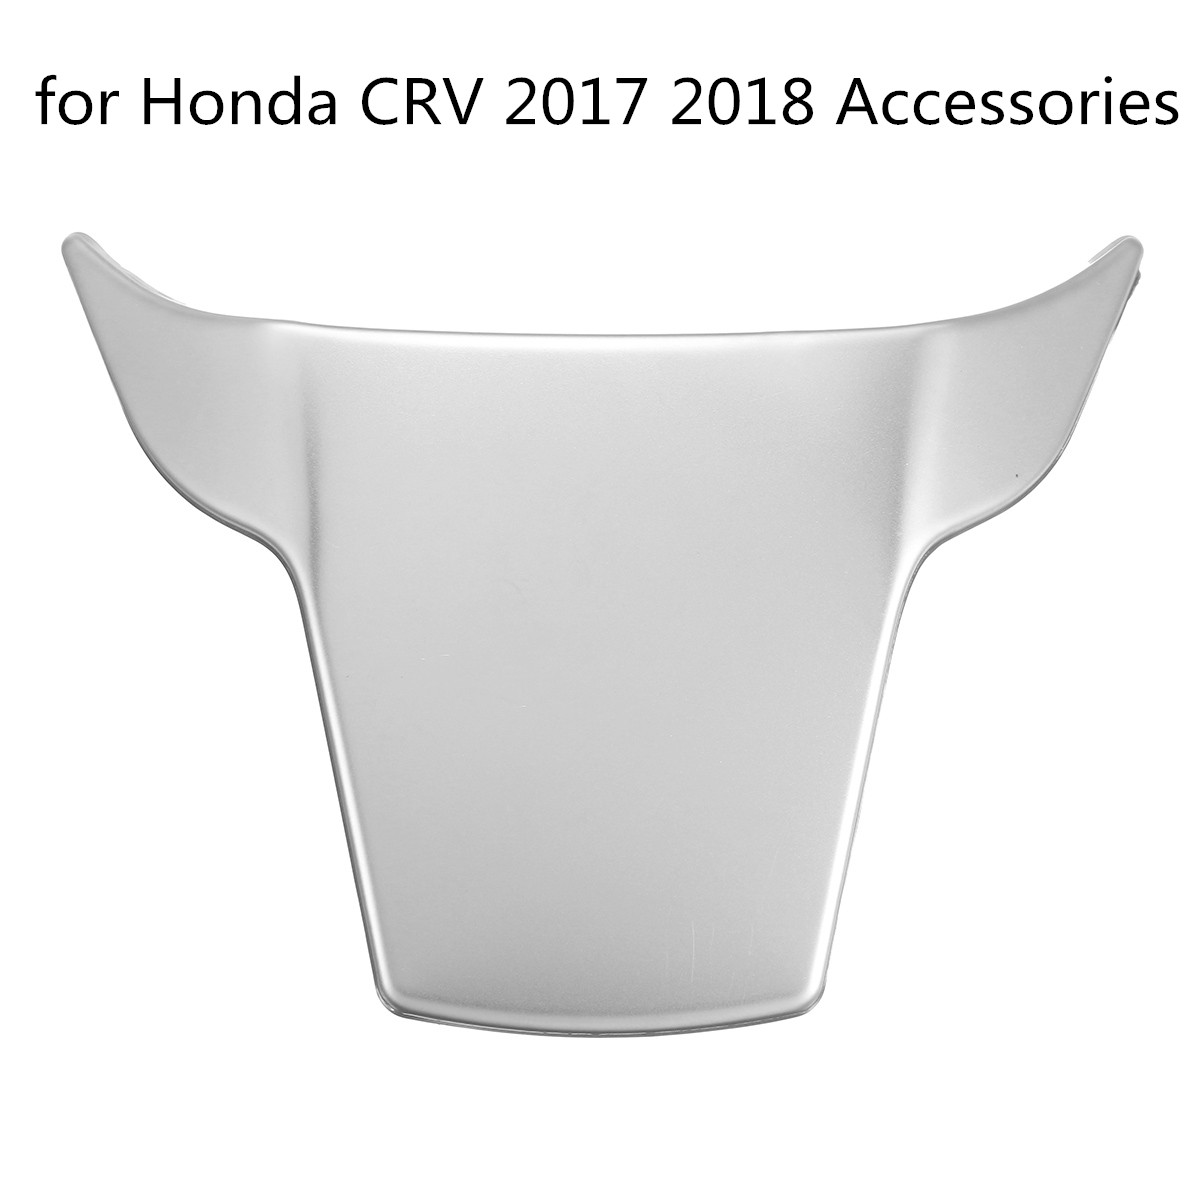 Stainless-Steel-Steering-Wheel-Cover-Trims-for-Honda-CRV-2017-2018-Accessories-1212508